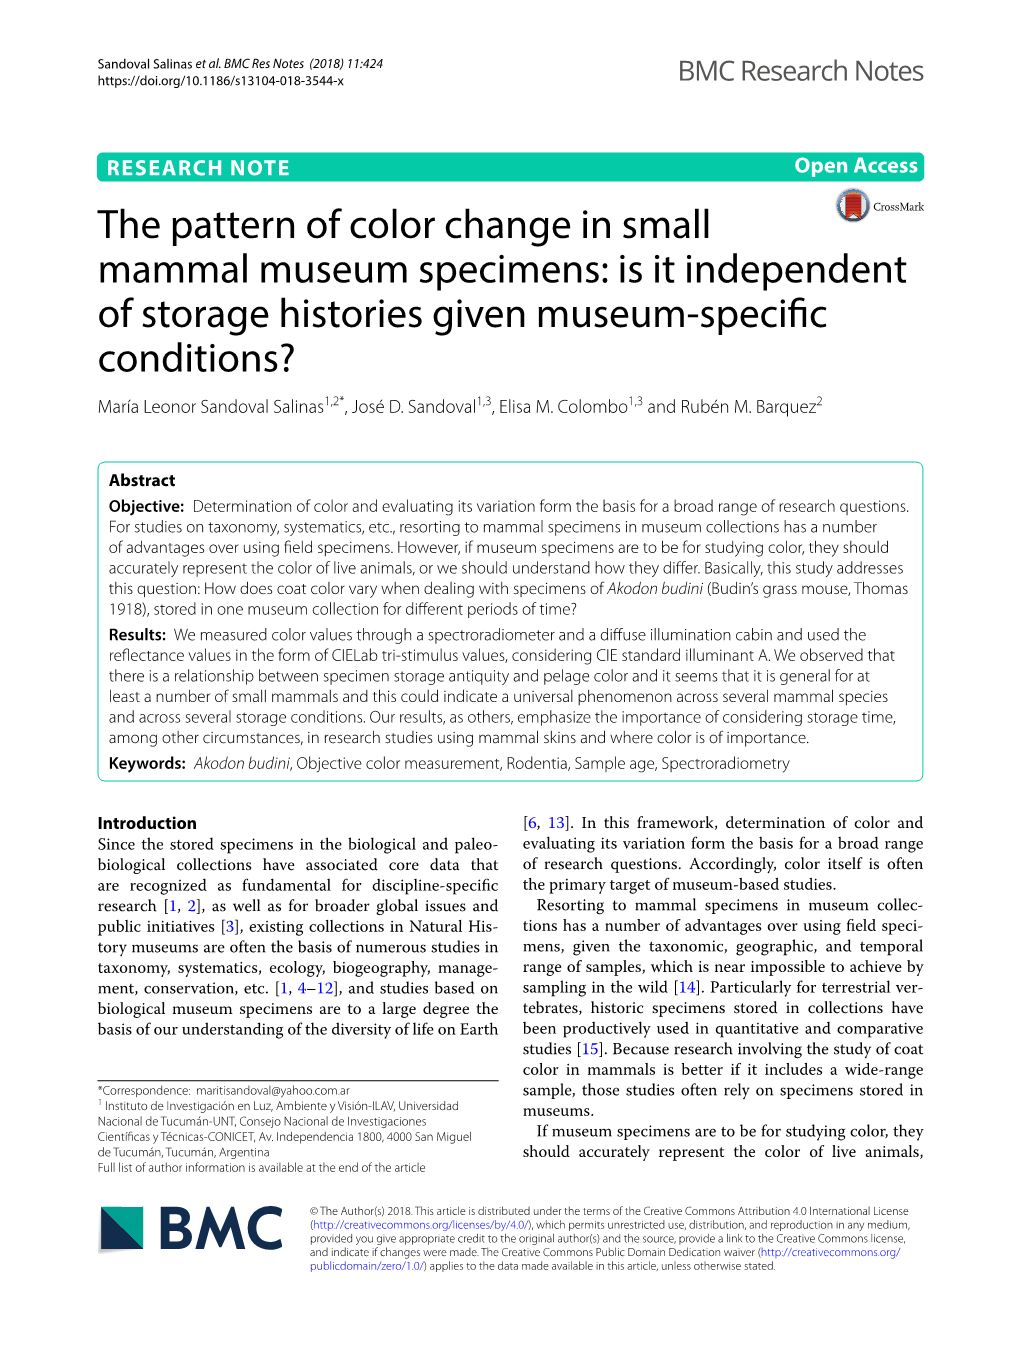 The Pattern of Color Change in Small Mammal